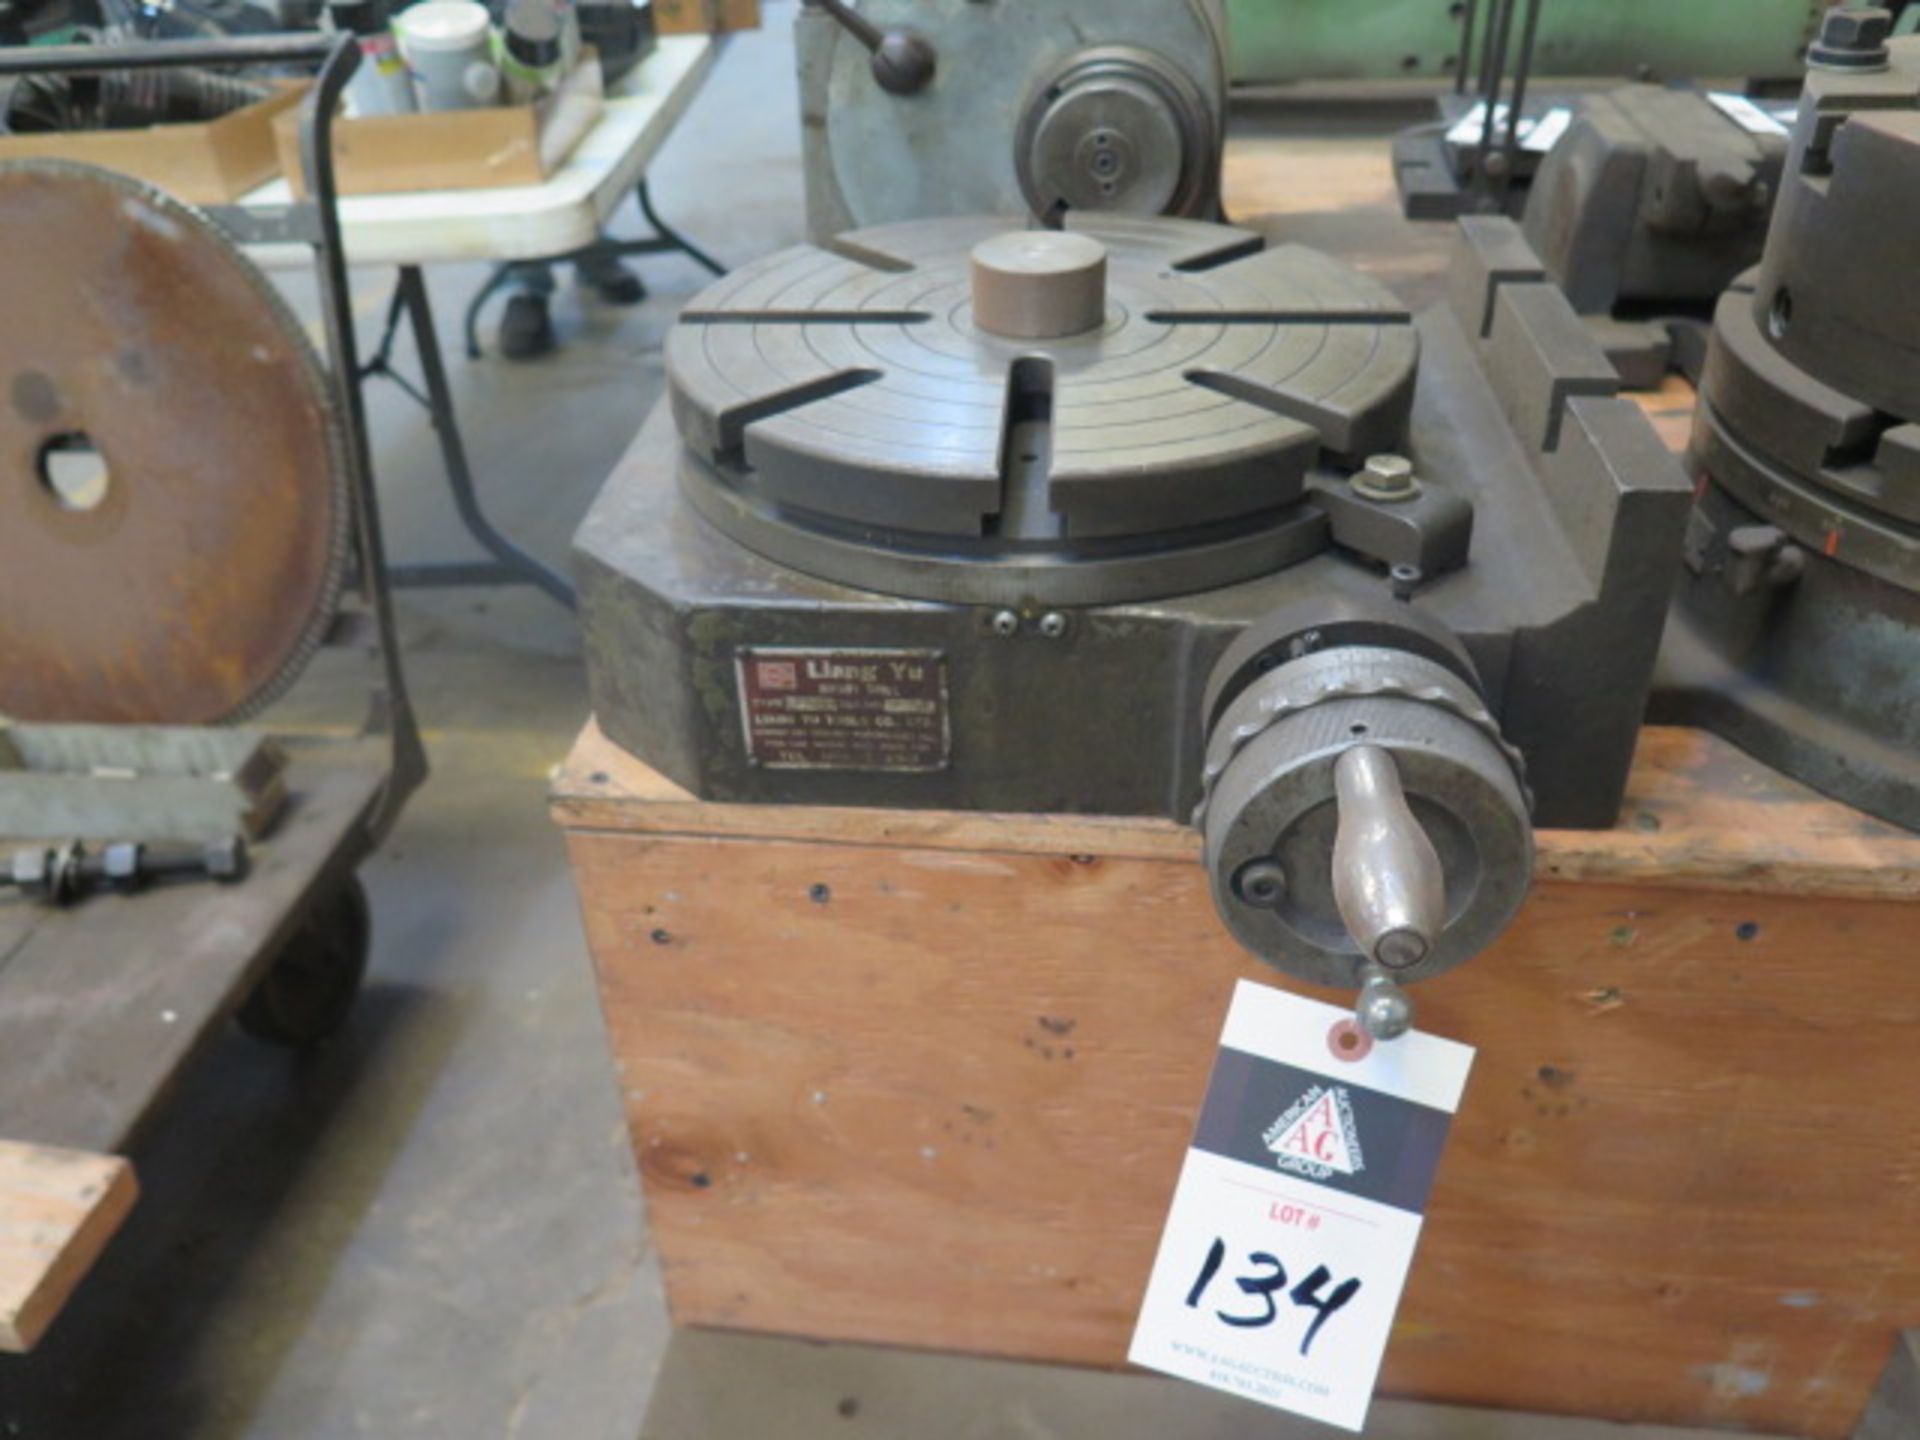 Liang Yu 12” Rotary Table (SOLD AS-IS - NO WARRANTY)